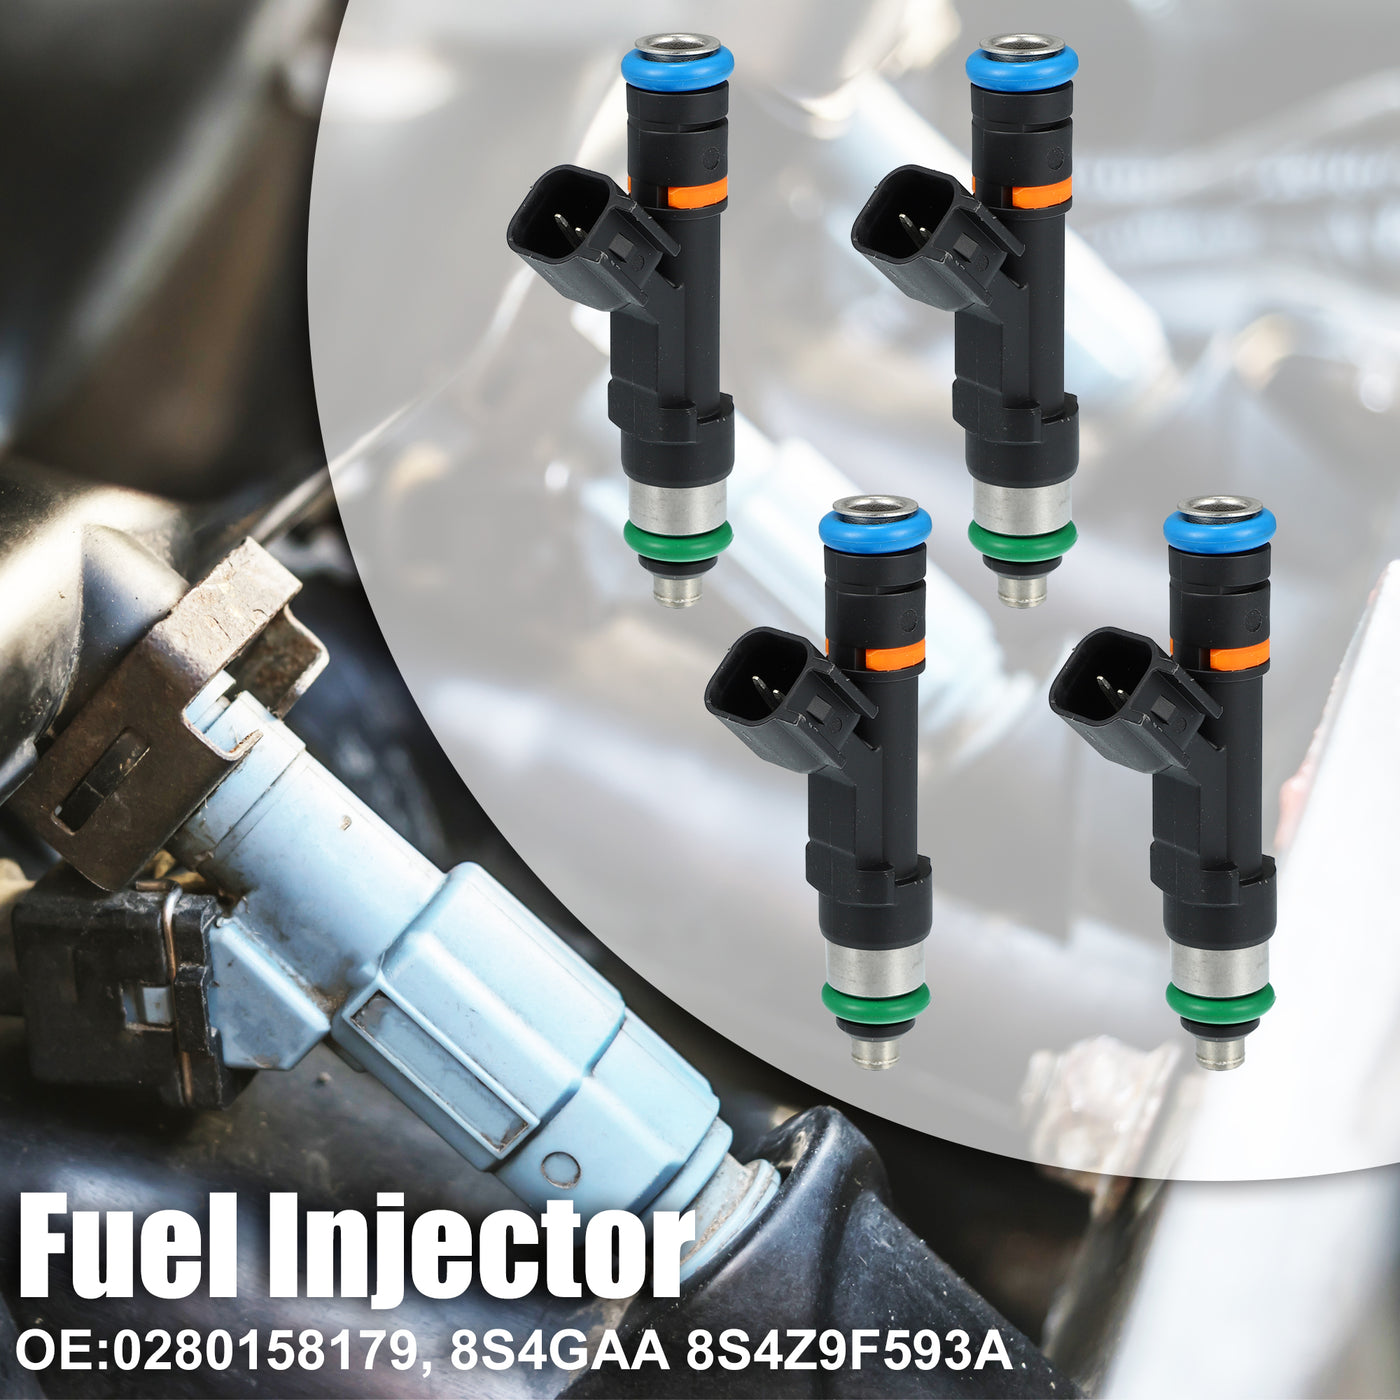 X AUTOHAUX 4pcs 0280158179 8S4Z9F593A Fuel Injector for Ford C-Max 2.0L 2013-2018 for Ford Focus 2.0L 2008-2011 for Ford Fusion 1.5L 1.6L 2.0L 2.5L 2013-2020